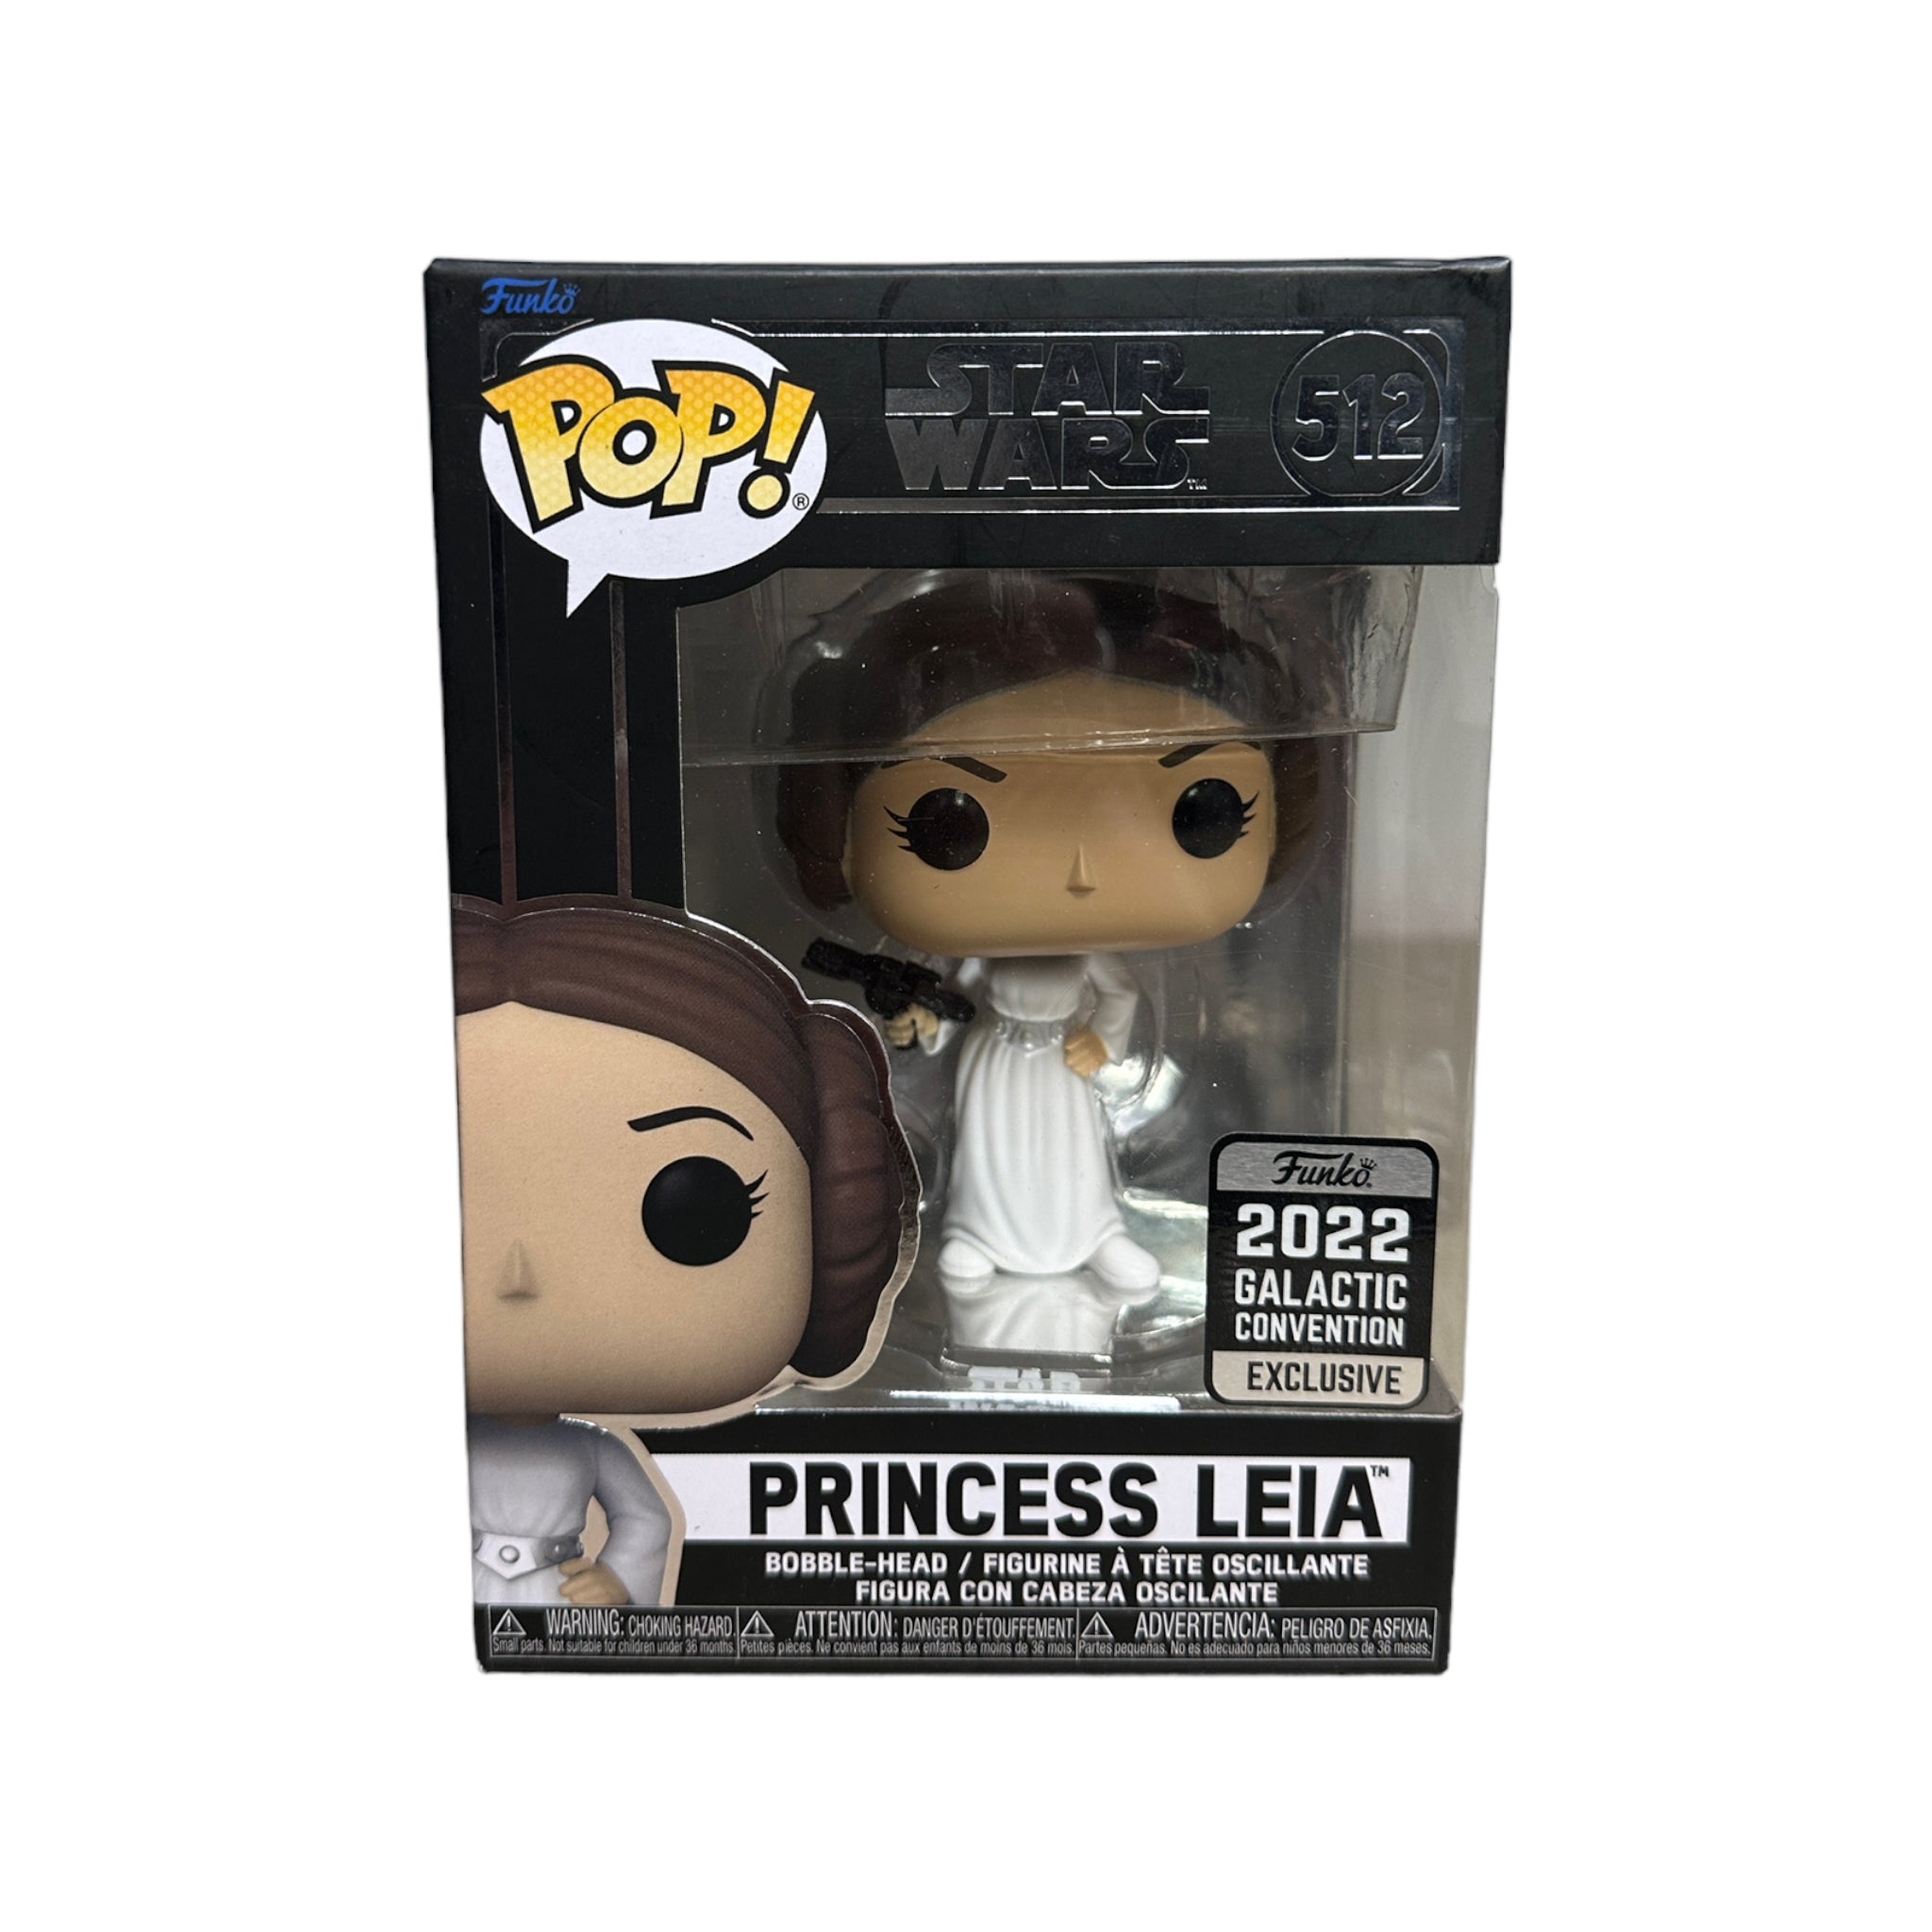 Princess Leia #512 Funko Pop! - Star Wars - Galactic Convention 2022 Exclusive - Condition 8.75/10